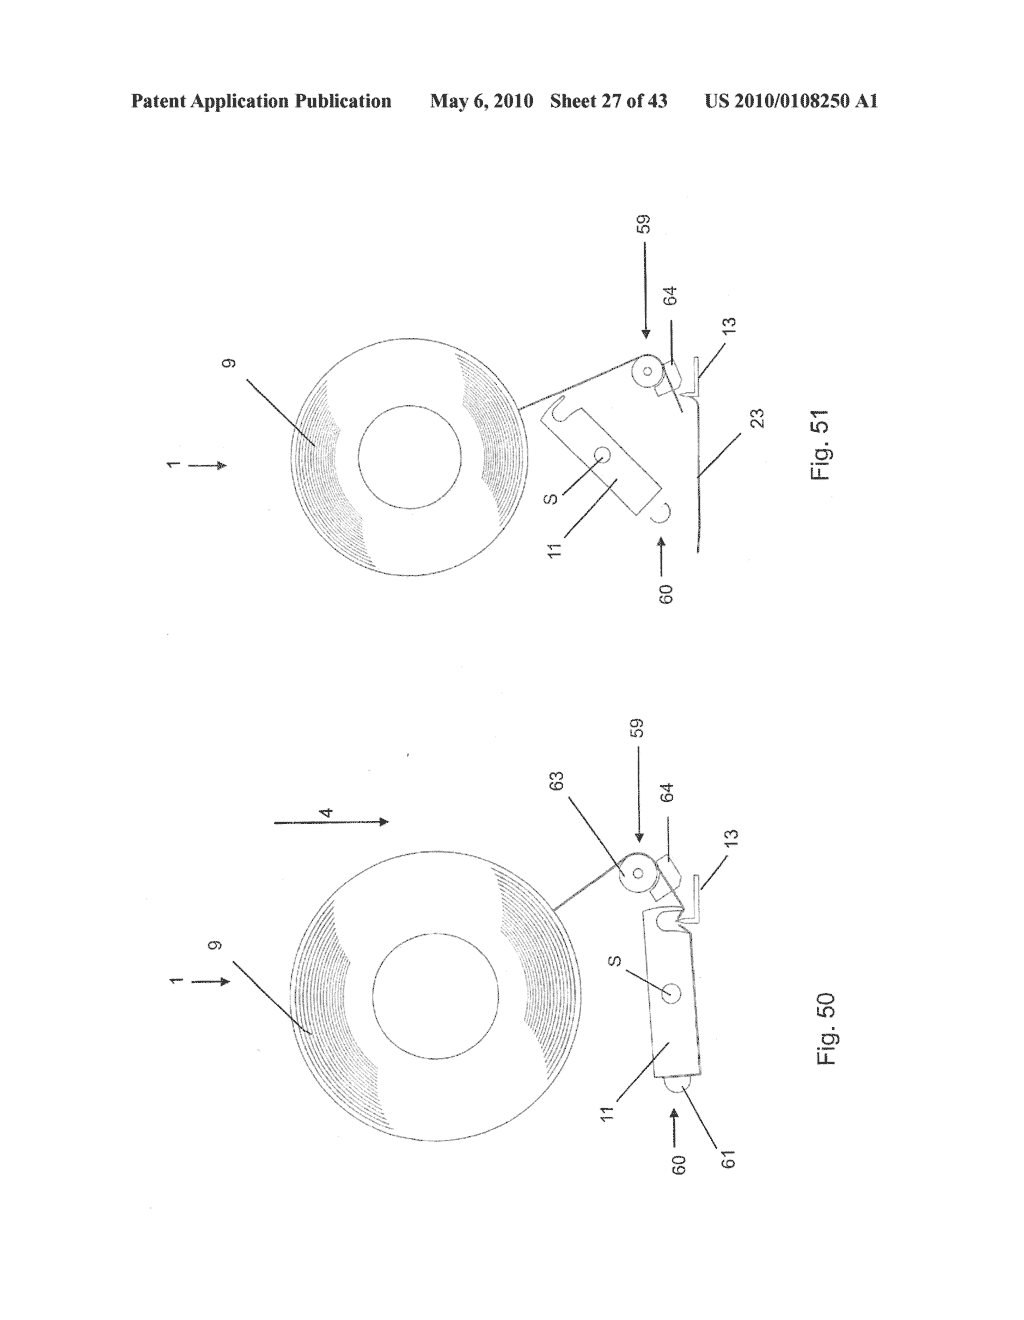 ADHESIVE TAPE STAMP AND METHOD FOR STAMPING AN ADHESIVE TAPE SECTION ONTO AN OBJECT - diagram, schematic, and image 28